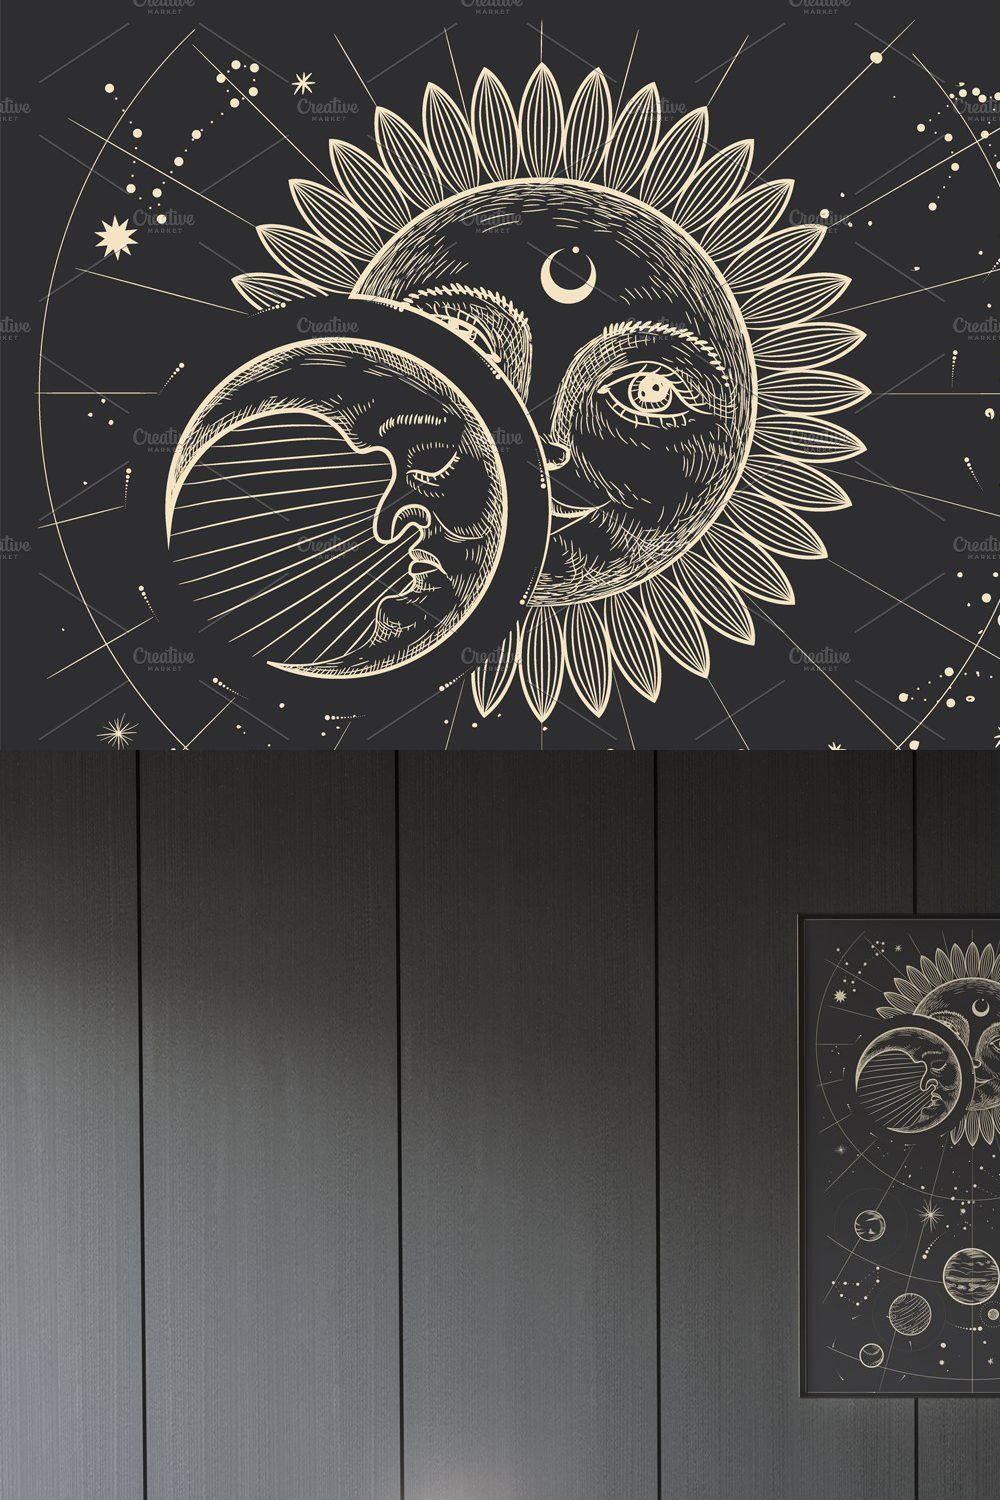 Solar system pinterest preview image.